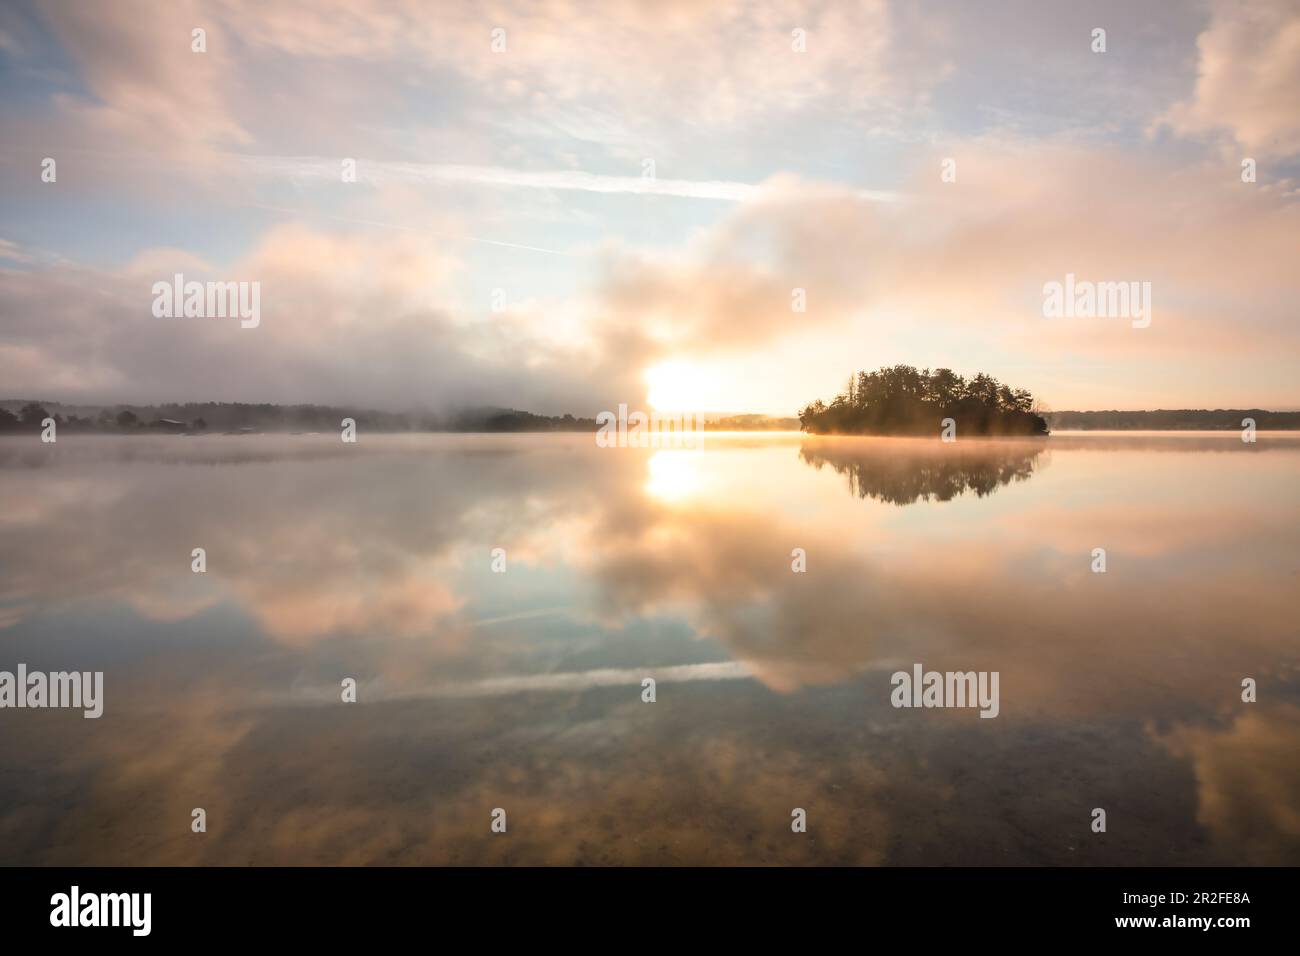 The day wakes up at Steinberger See, Steinberg am See, Upper Palatinate Lake District, Schwandorf, Upper Palatinate, Bavaria, Germany Stock Photo